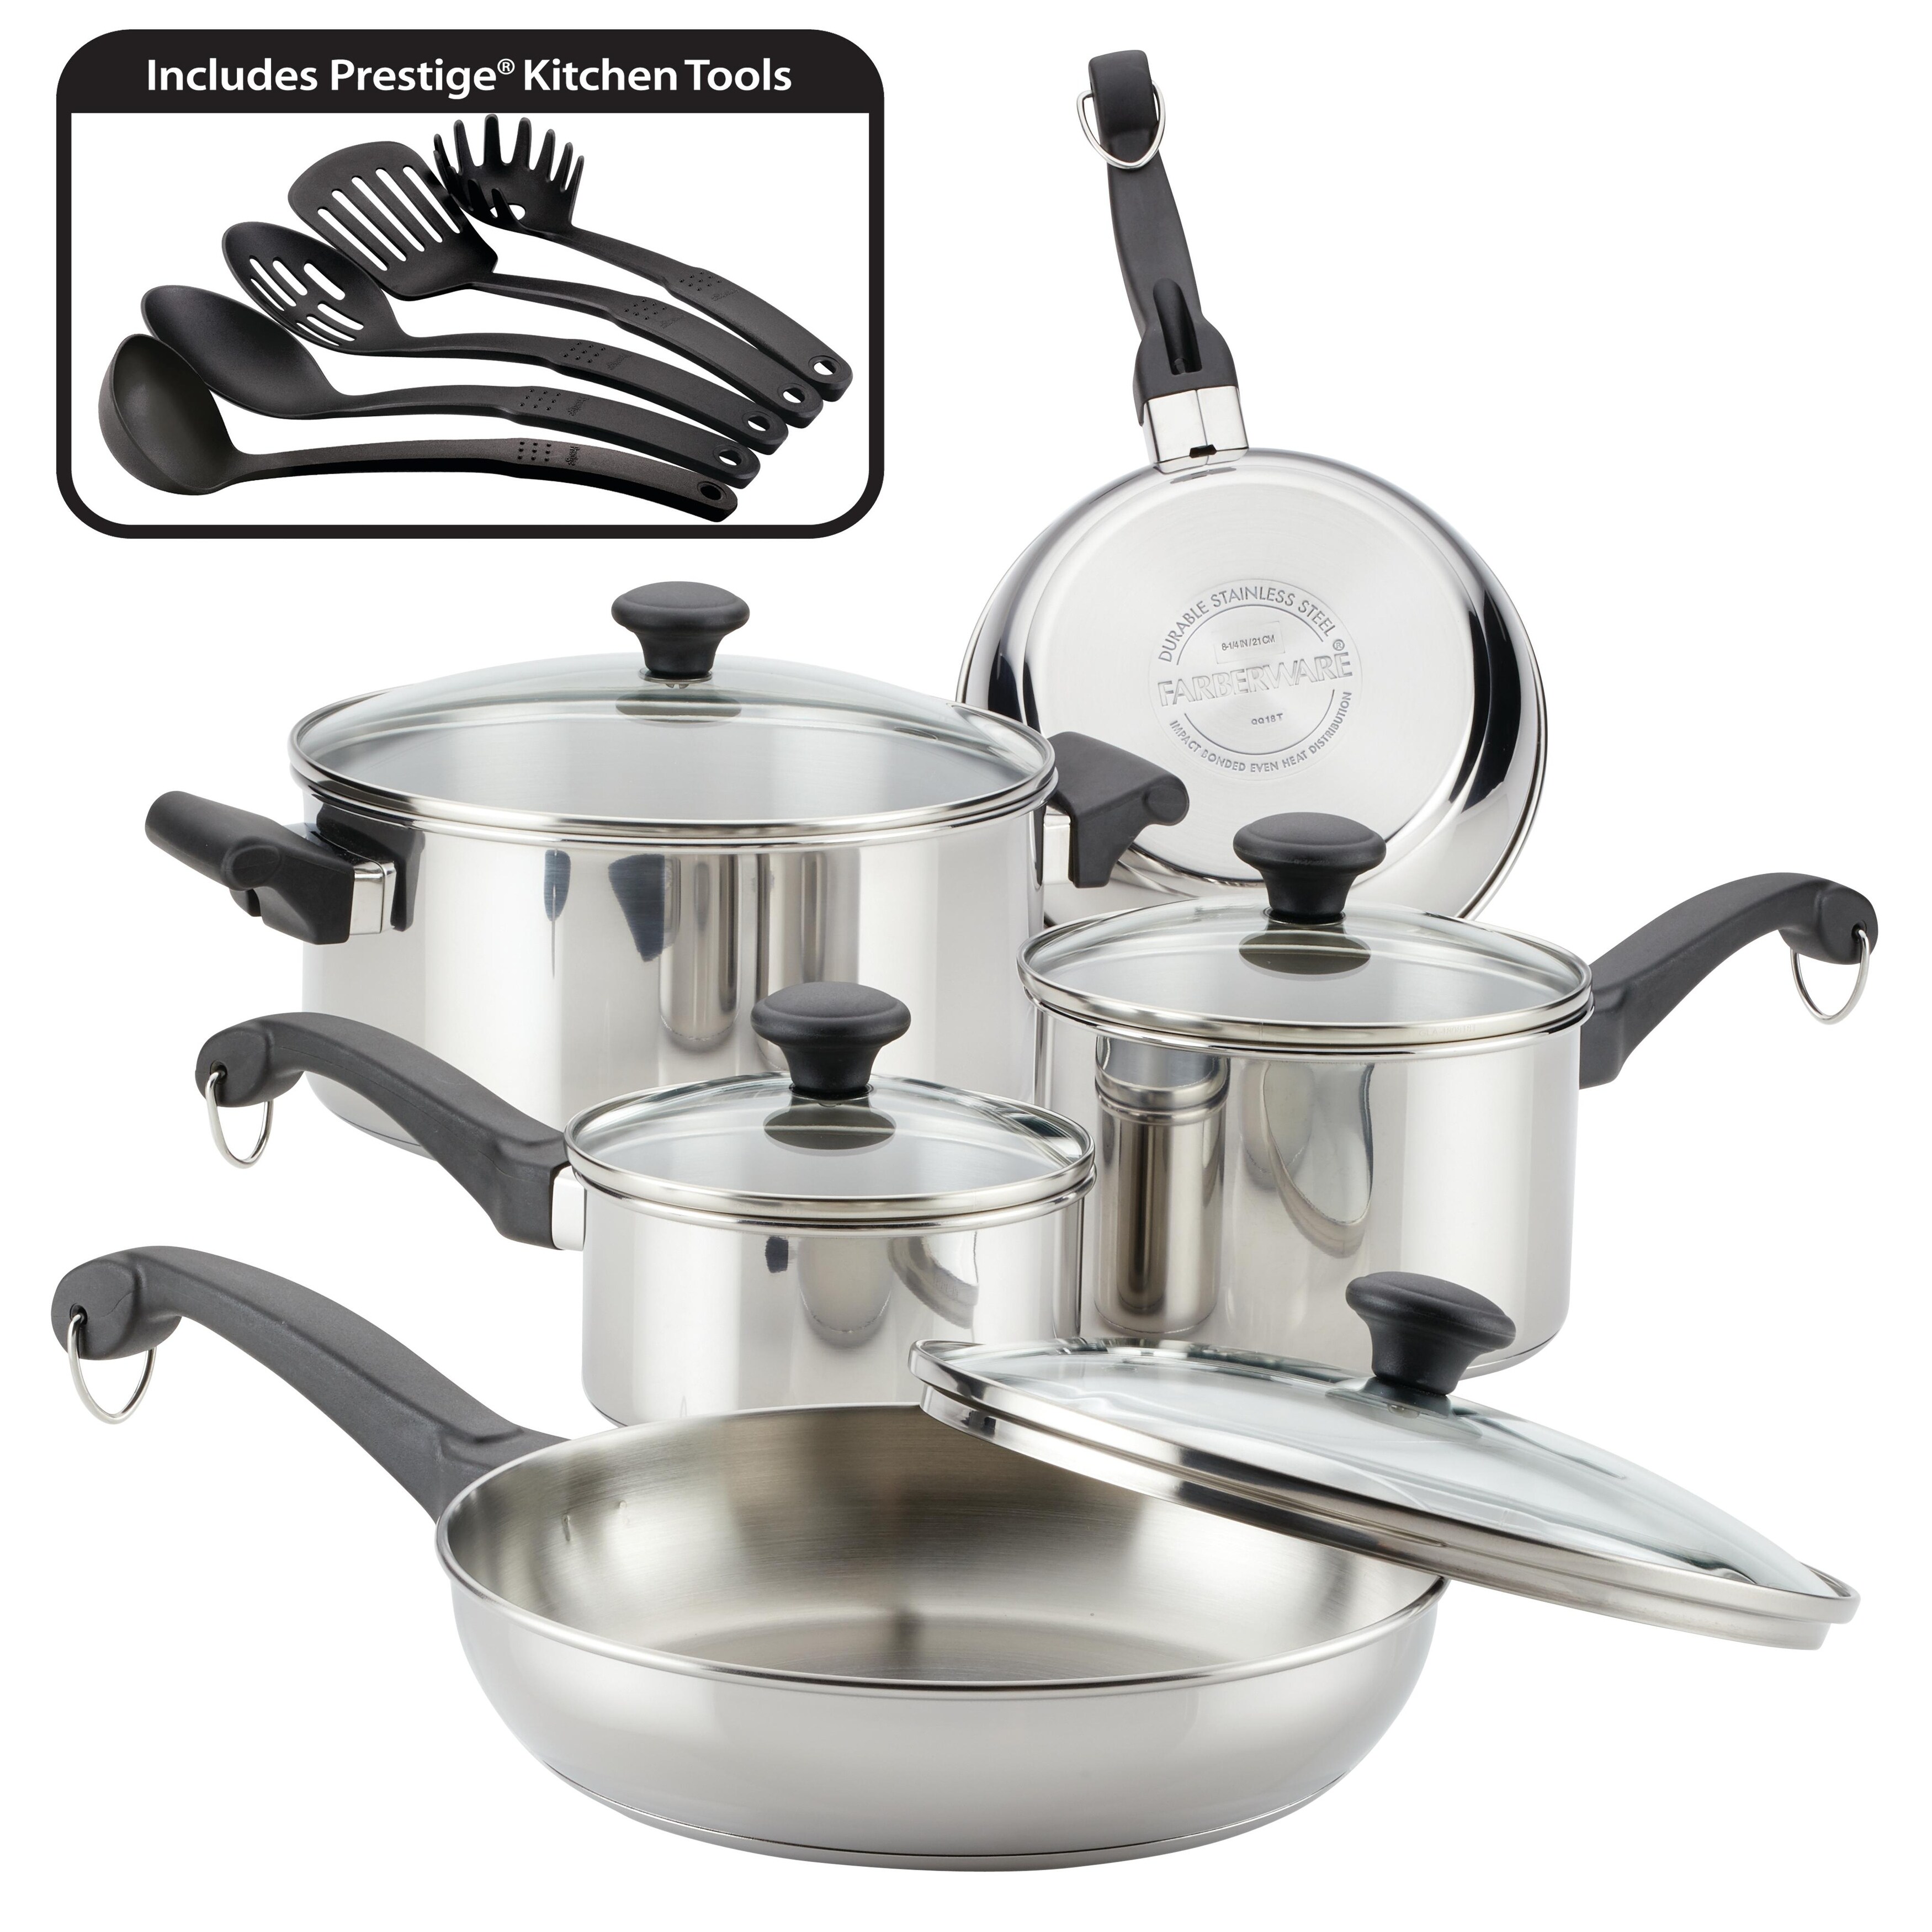 https://ak1.ostkcdn.com/images/products/is/images/direct/ad88d6c72fba9d2bdd8b24001bea1c0b649c35e5/14-Piece-Classic-Traditions-Stainless-Steel-Pots-and-Pans-Set-Cookware-Set.jpg